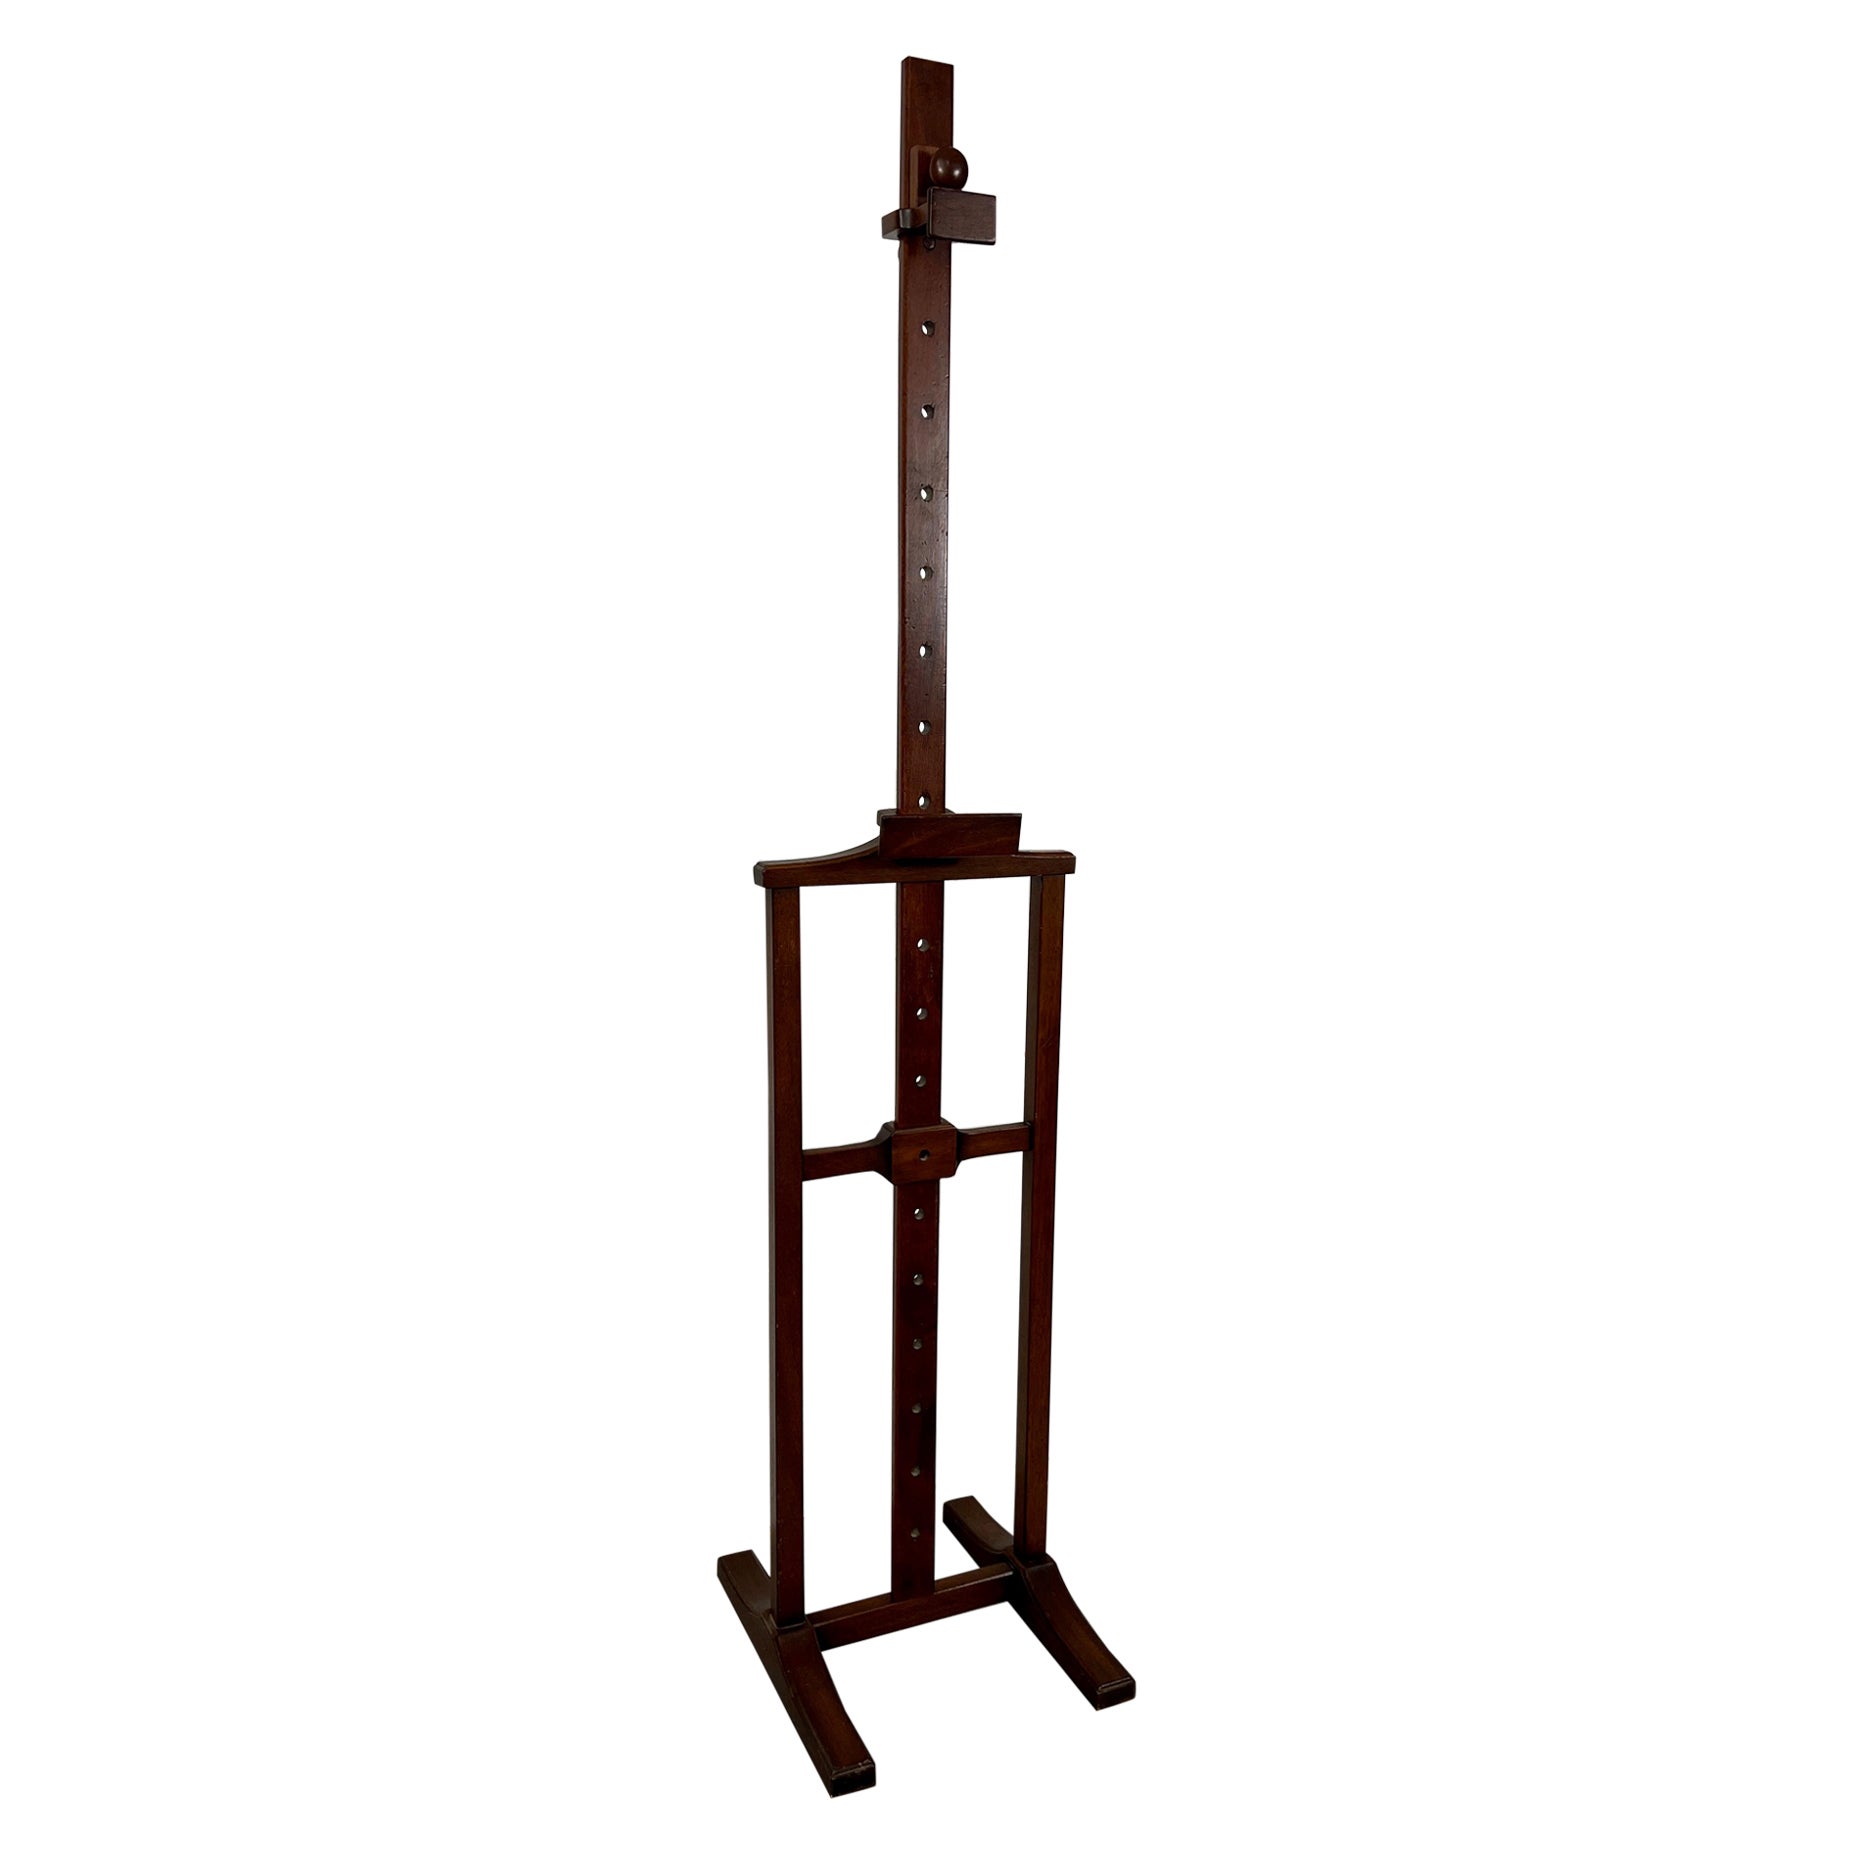 Furniture, Easel, Mahogany with Brass Fittings, Large, Antique, c